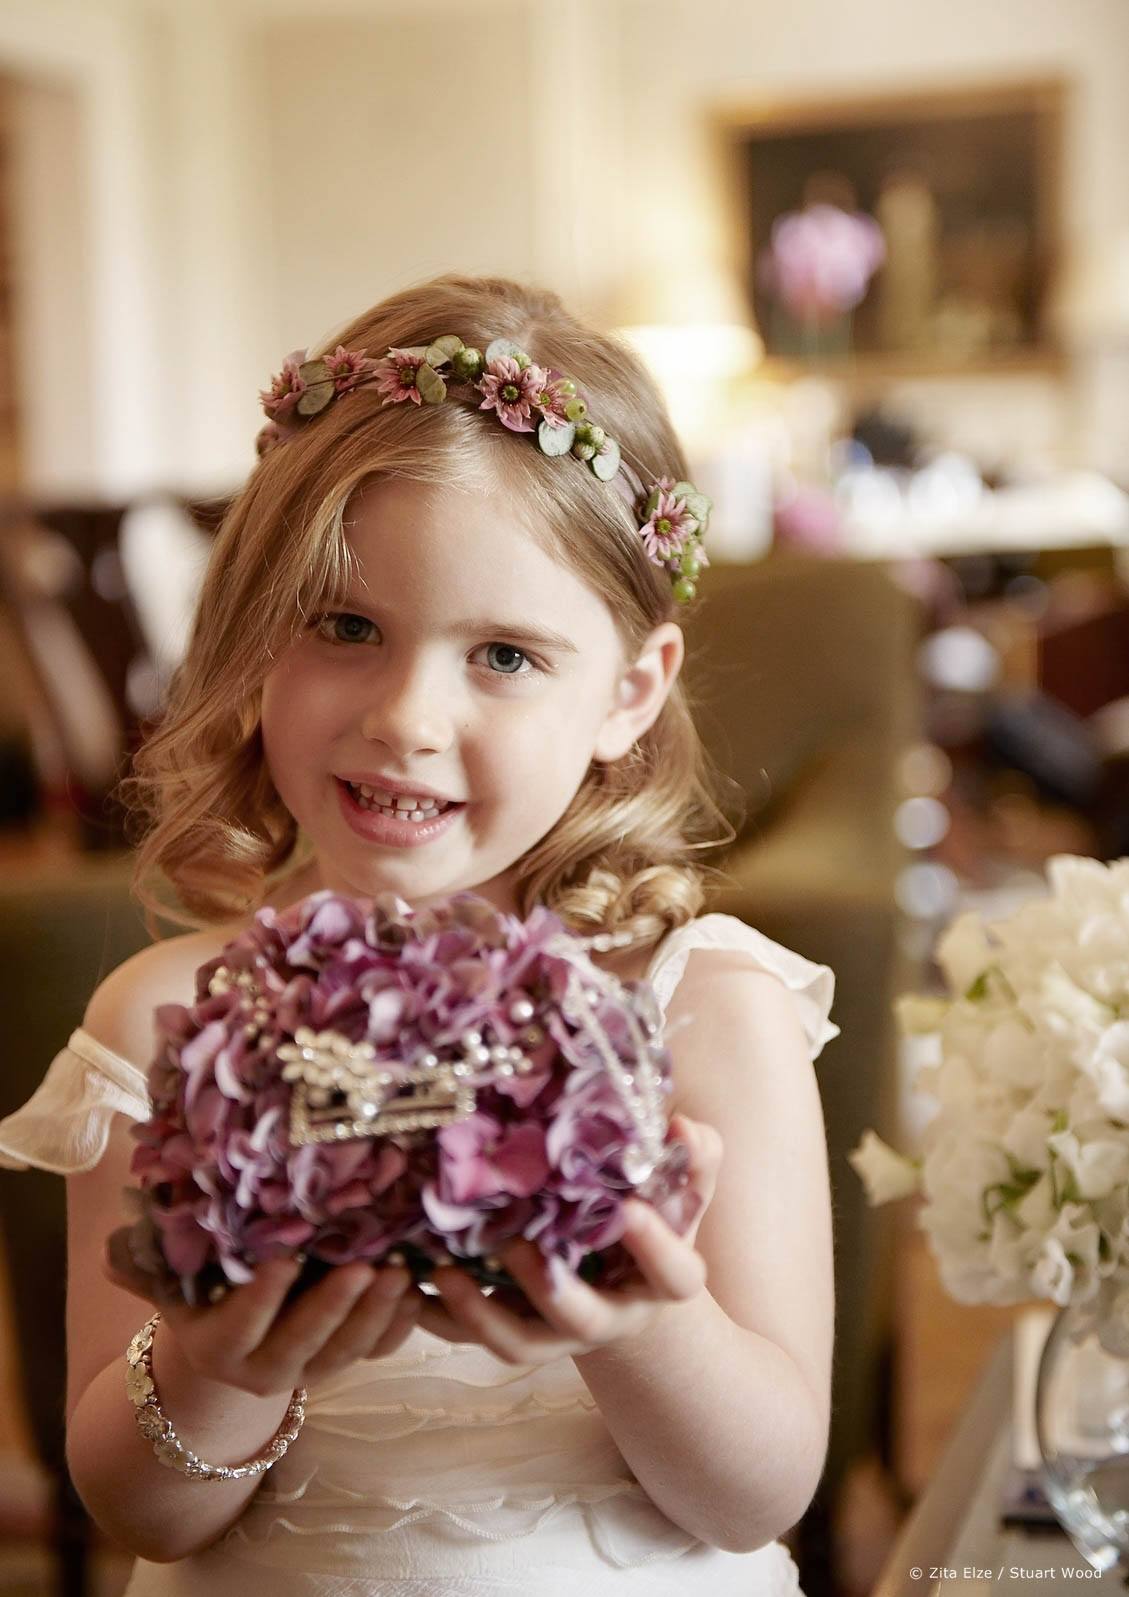 little girl with a flower crown holding a flower bouquet